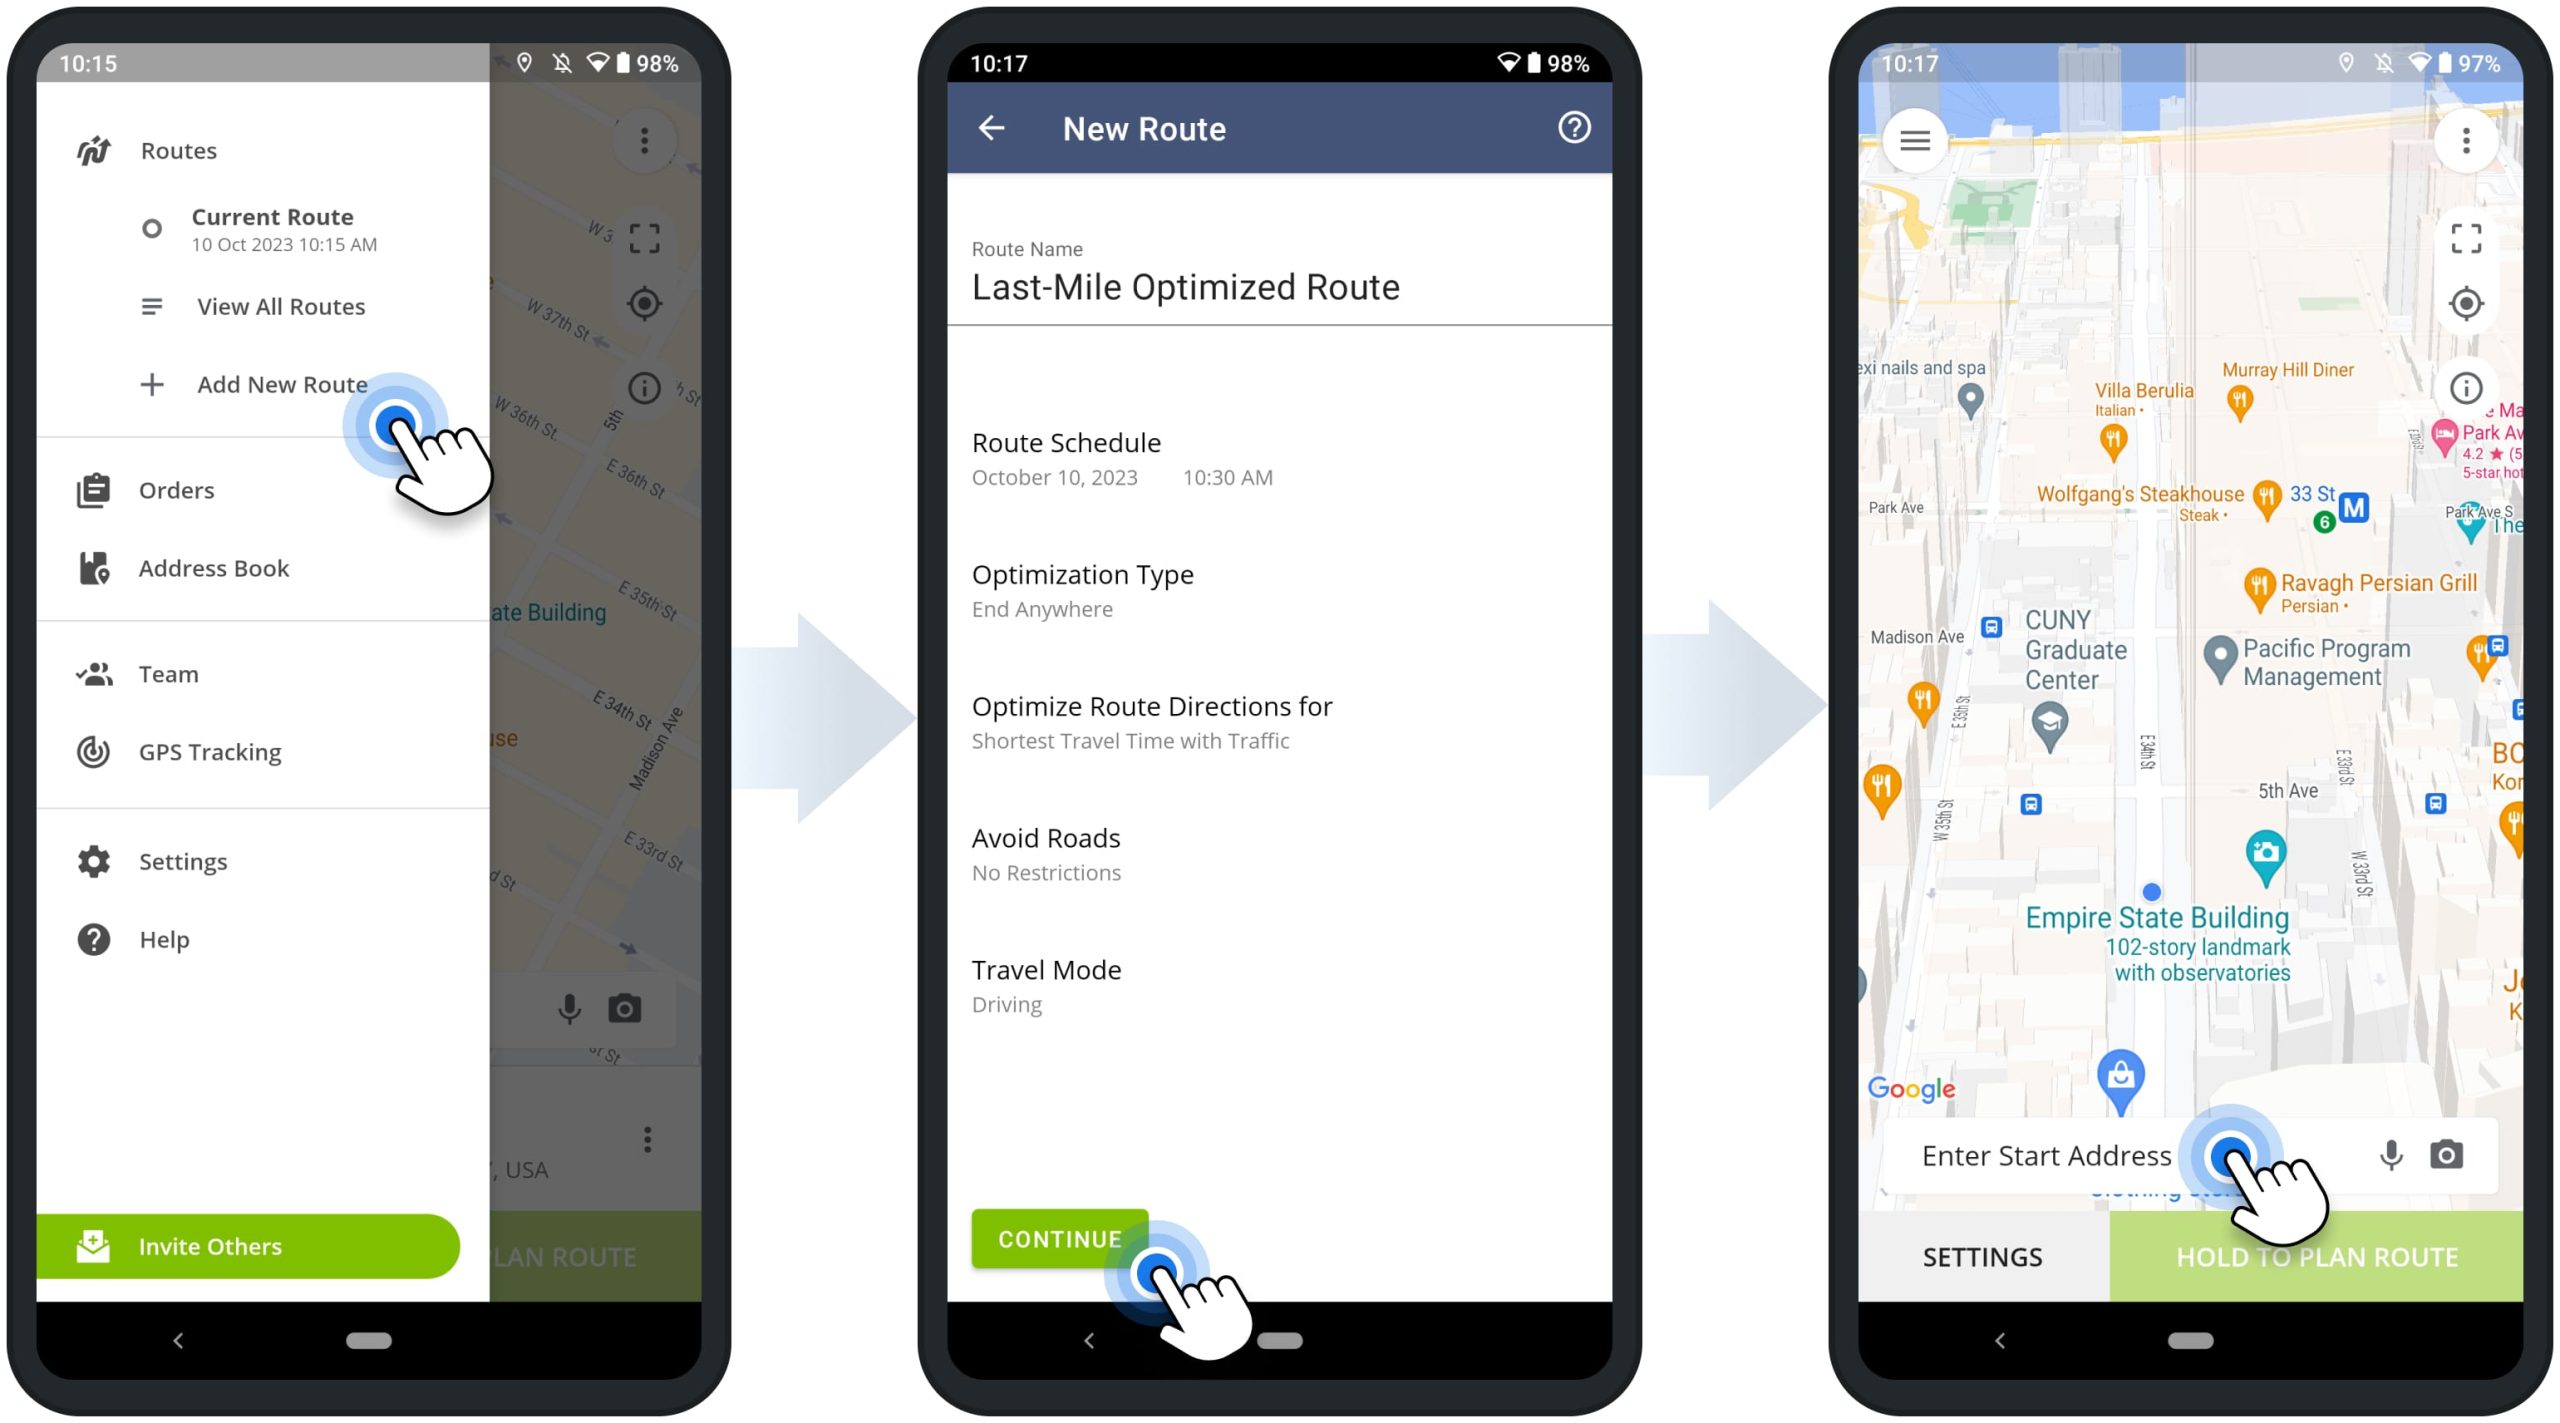 Plan a new route, schedule the route, and adjust route optimization settings on Route4Me's multi-stop route planner app.